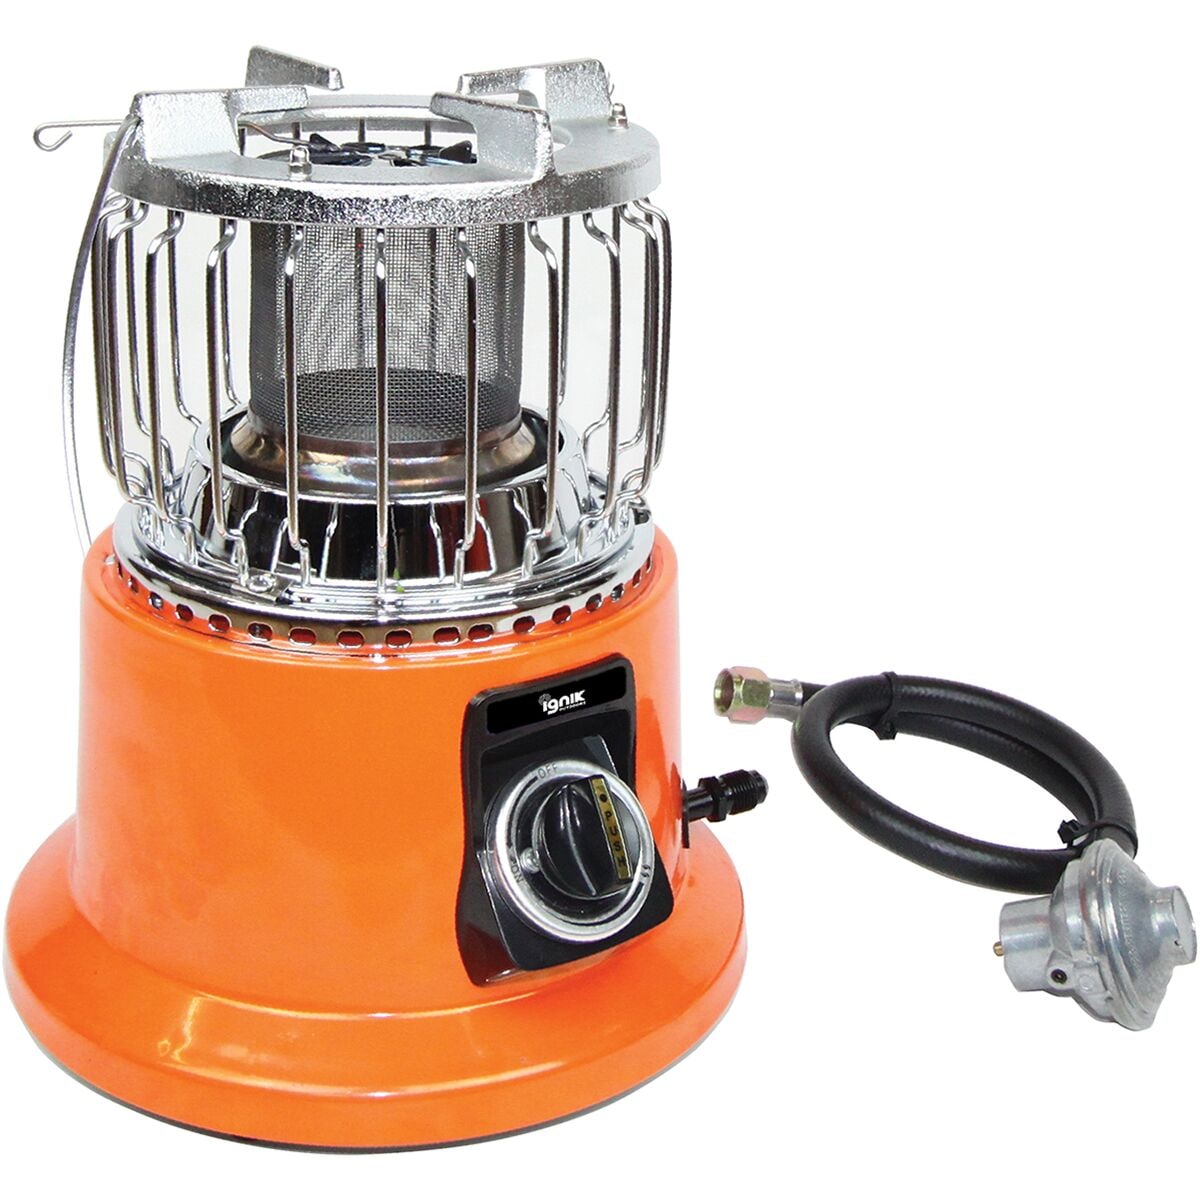 Photos - Outdoor Furniture 2-in-1 Heater/Stove